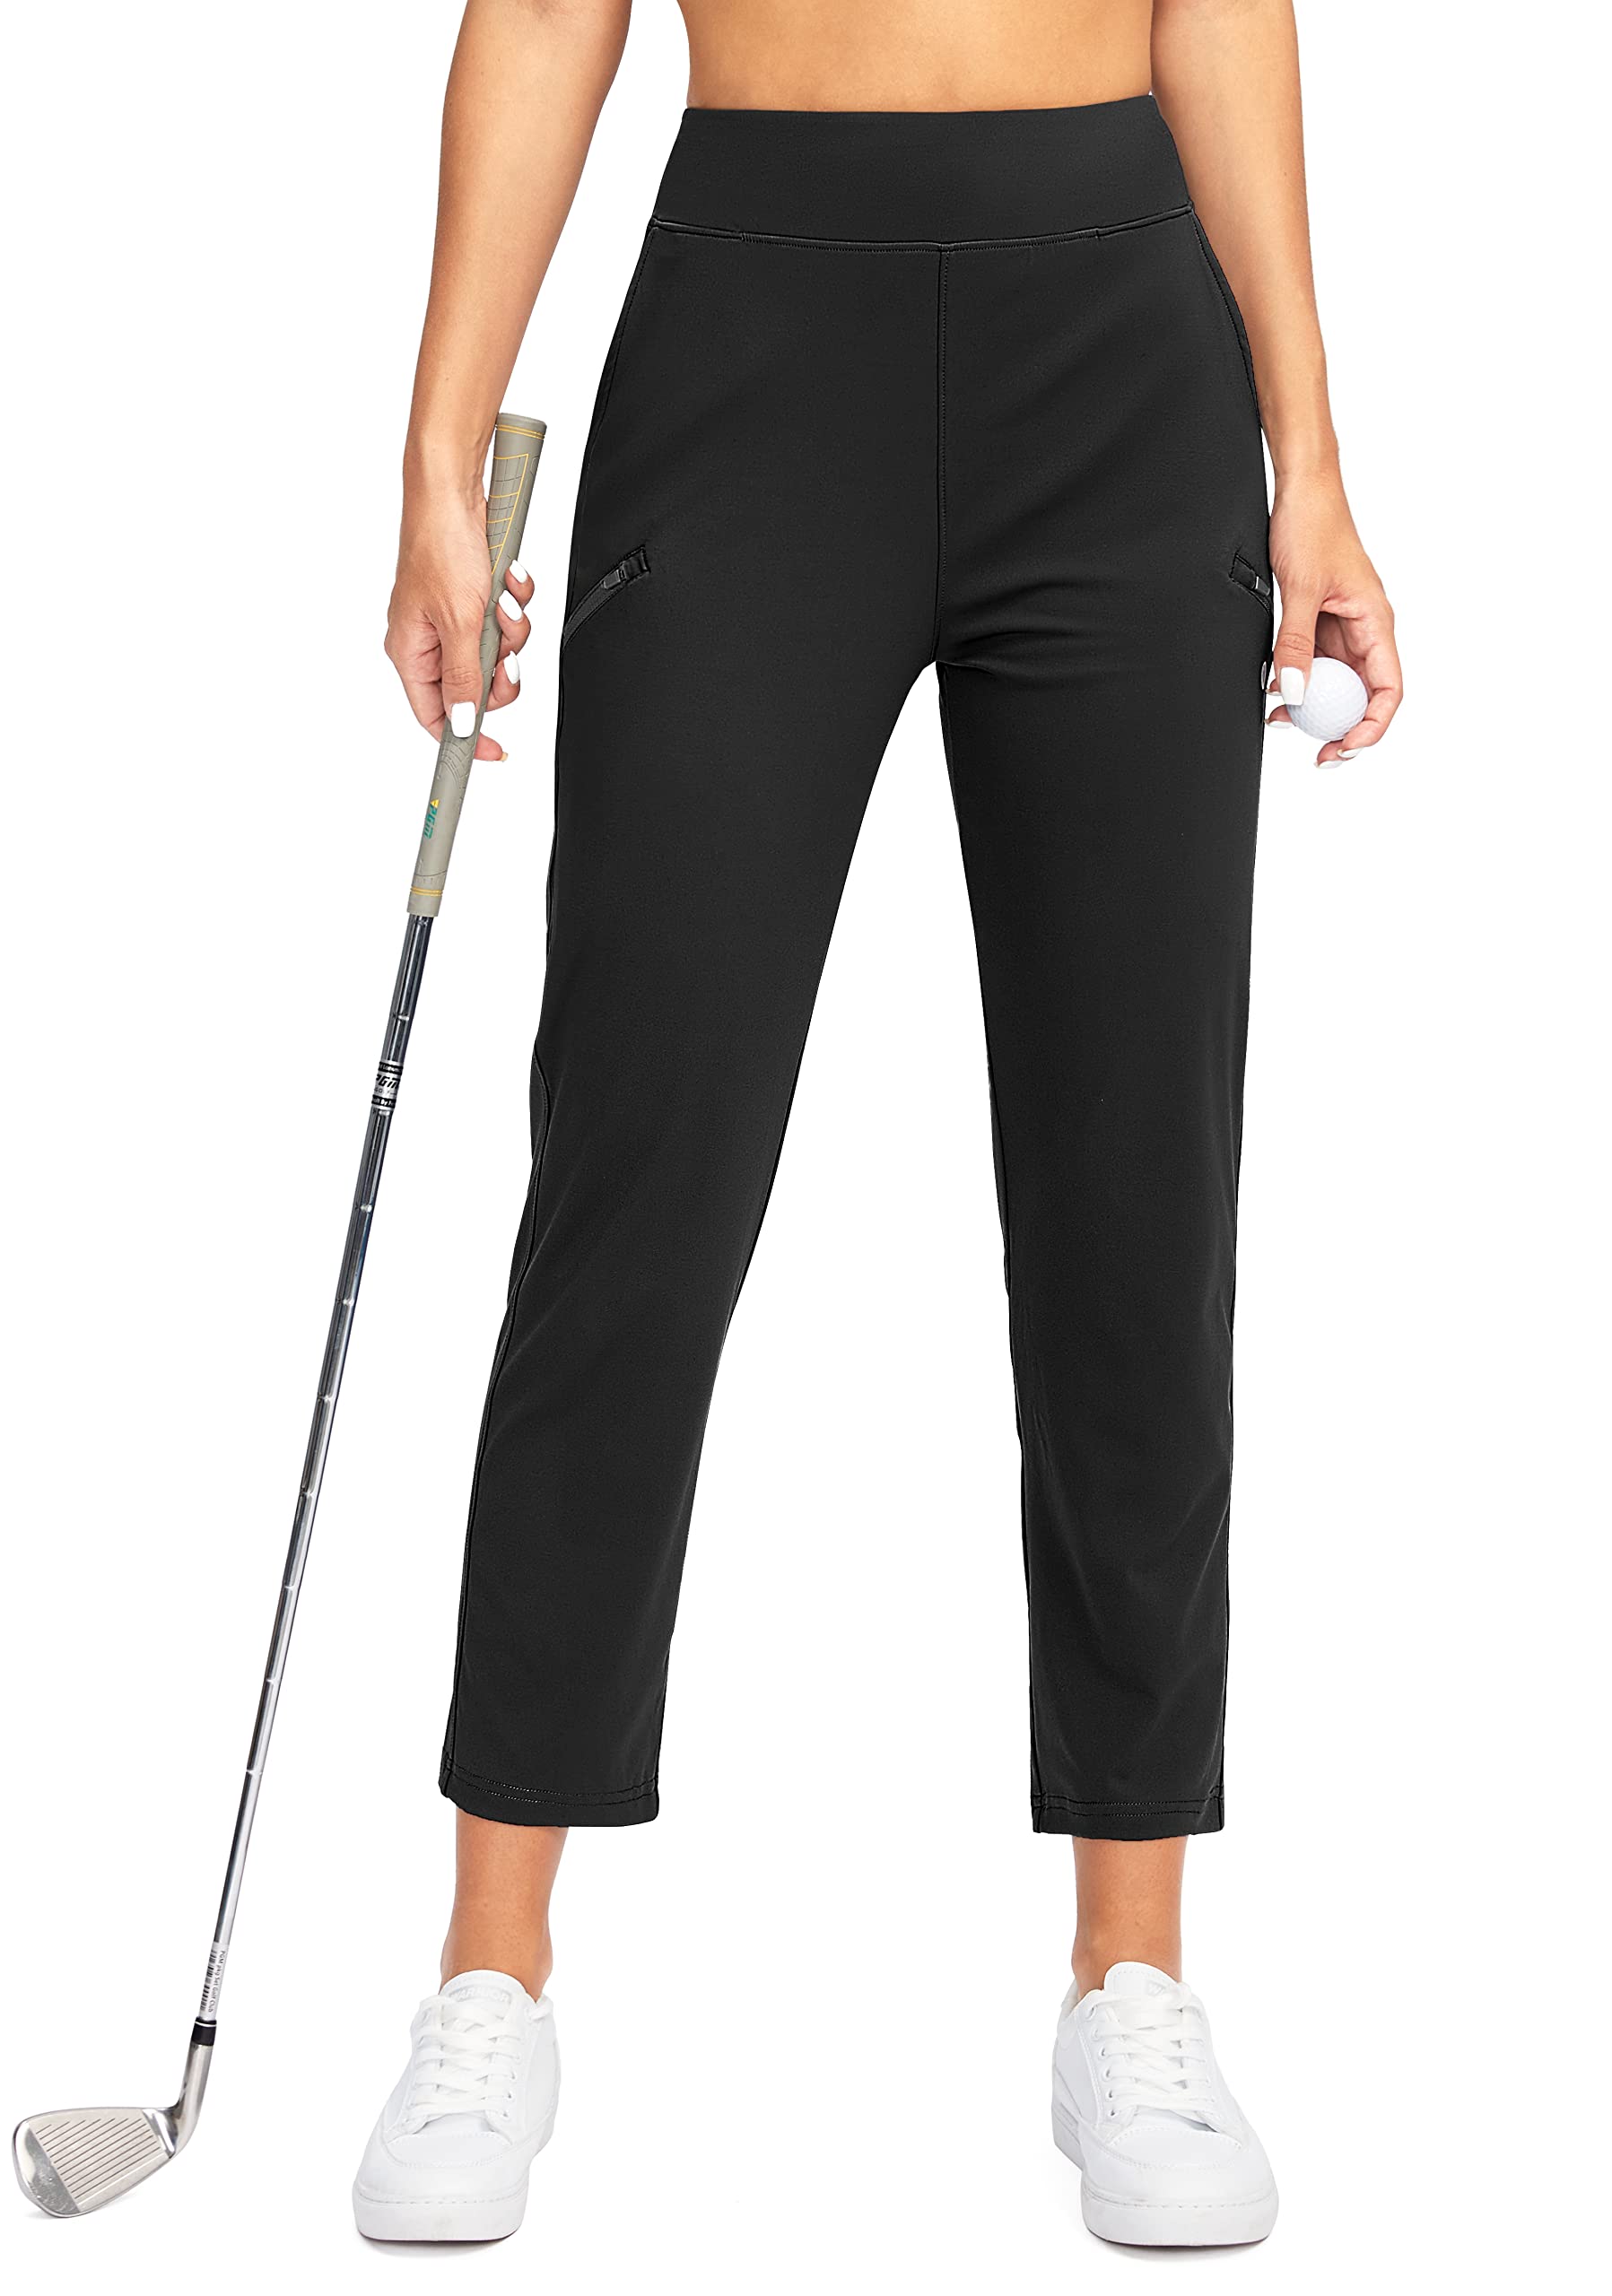 SANTINY Women's Golf Pants with 3 Zipper Pockets 7/8 Stretch High Waisted  Ankle Pants for Women Travel Work Black X-Small